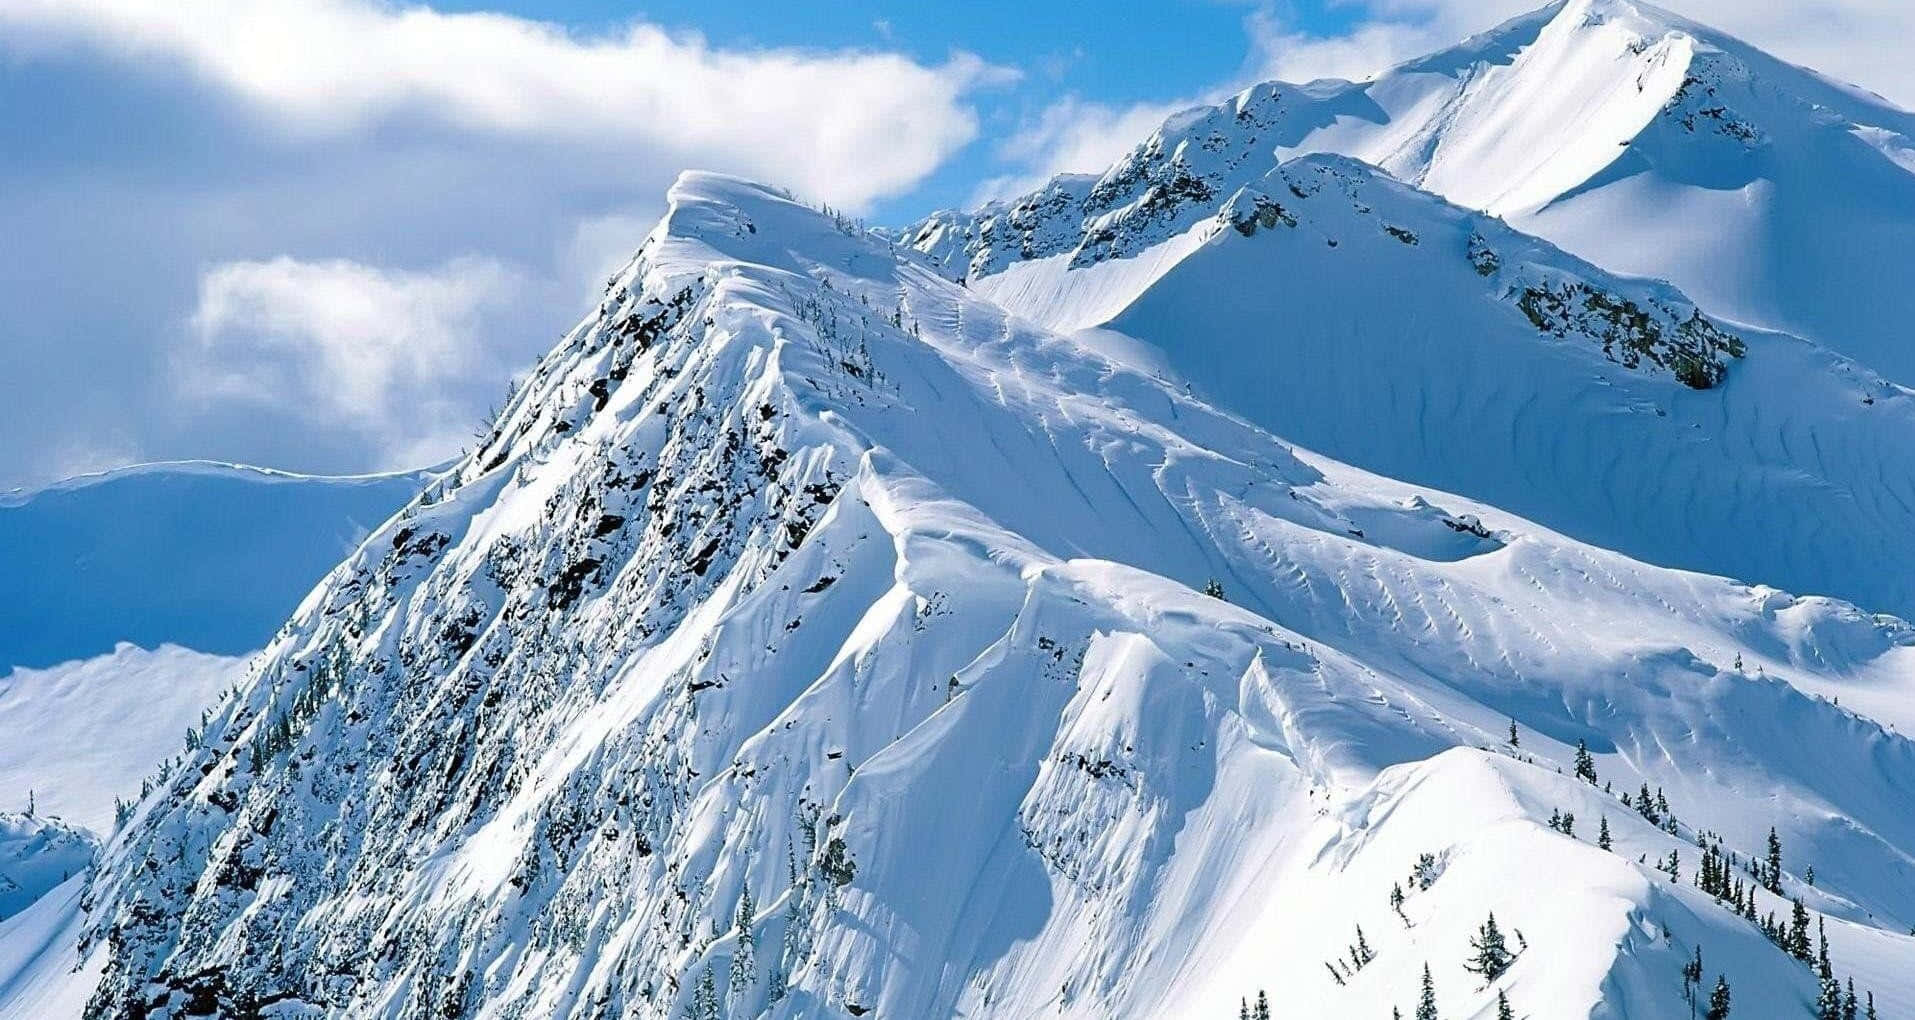 A Majestic View Of Snowy Mountain Peaks